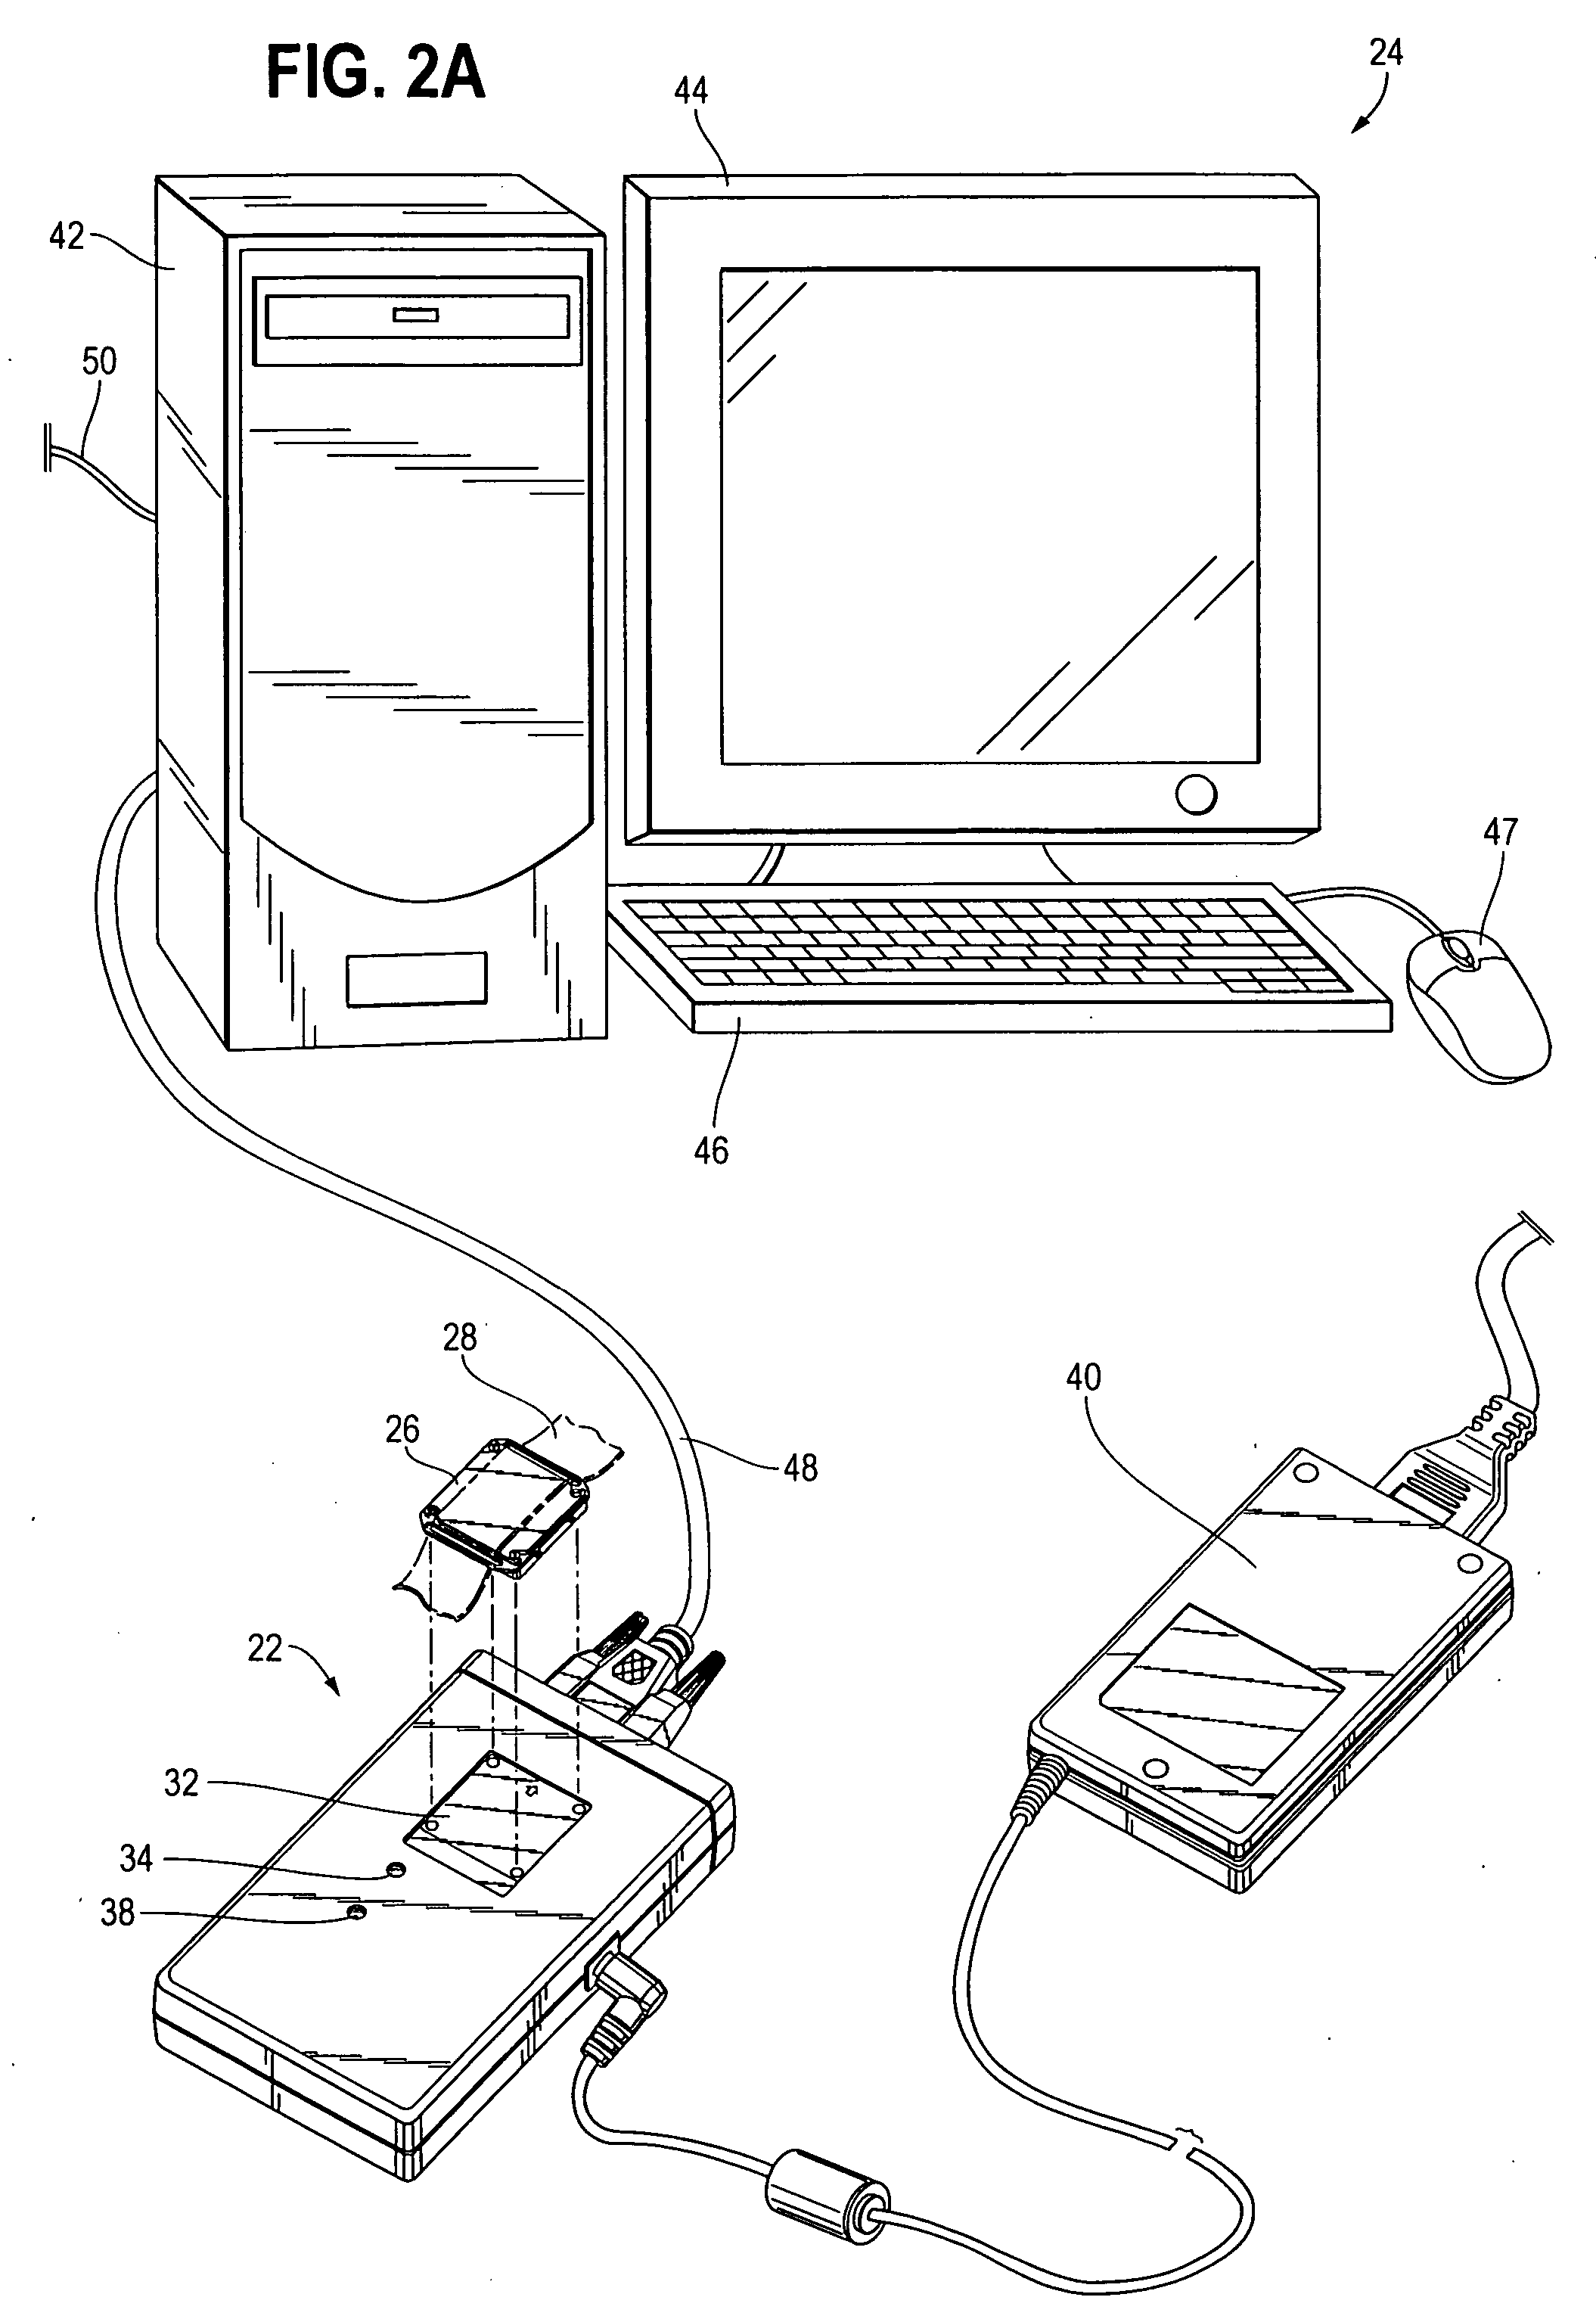 Automated system and method for determining drug testing